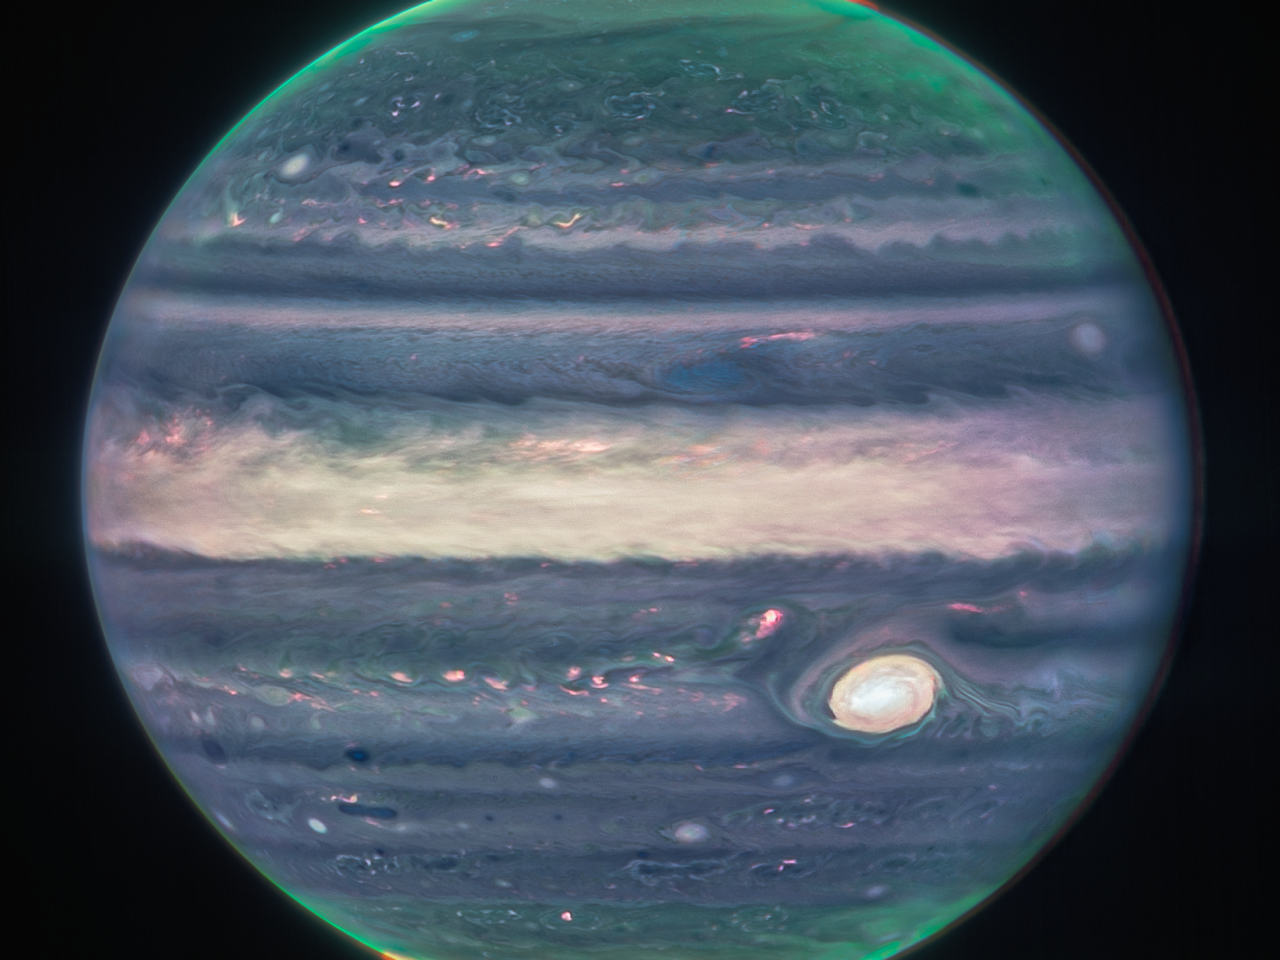 New Images of Jupiter from NASAs James Webb Space Telescope Discovery pic